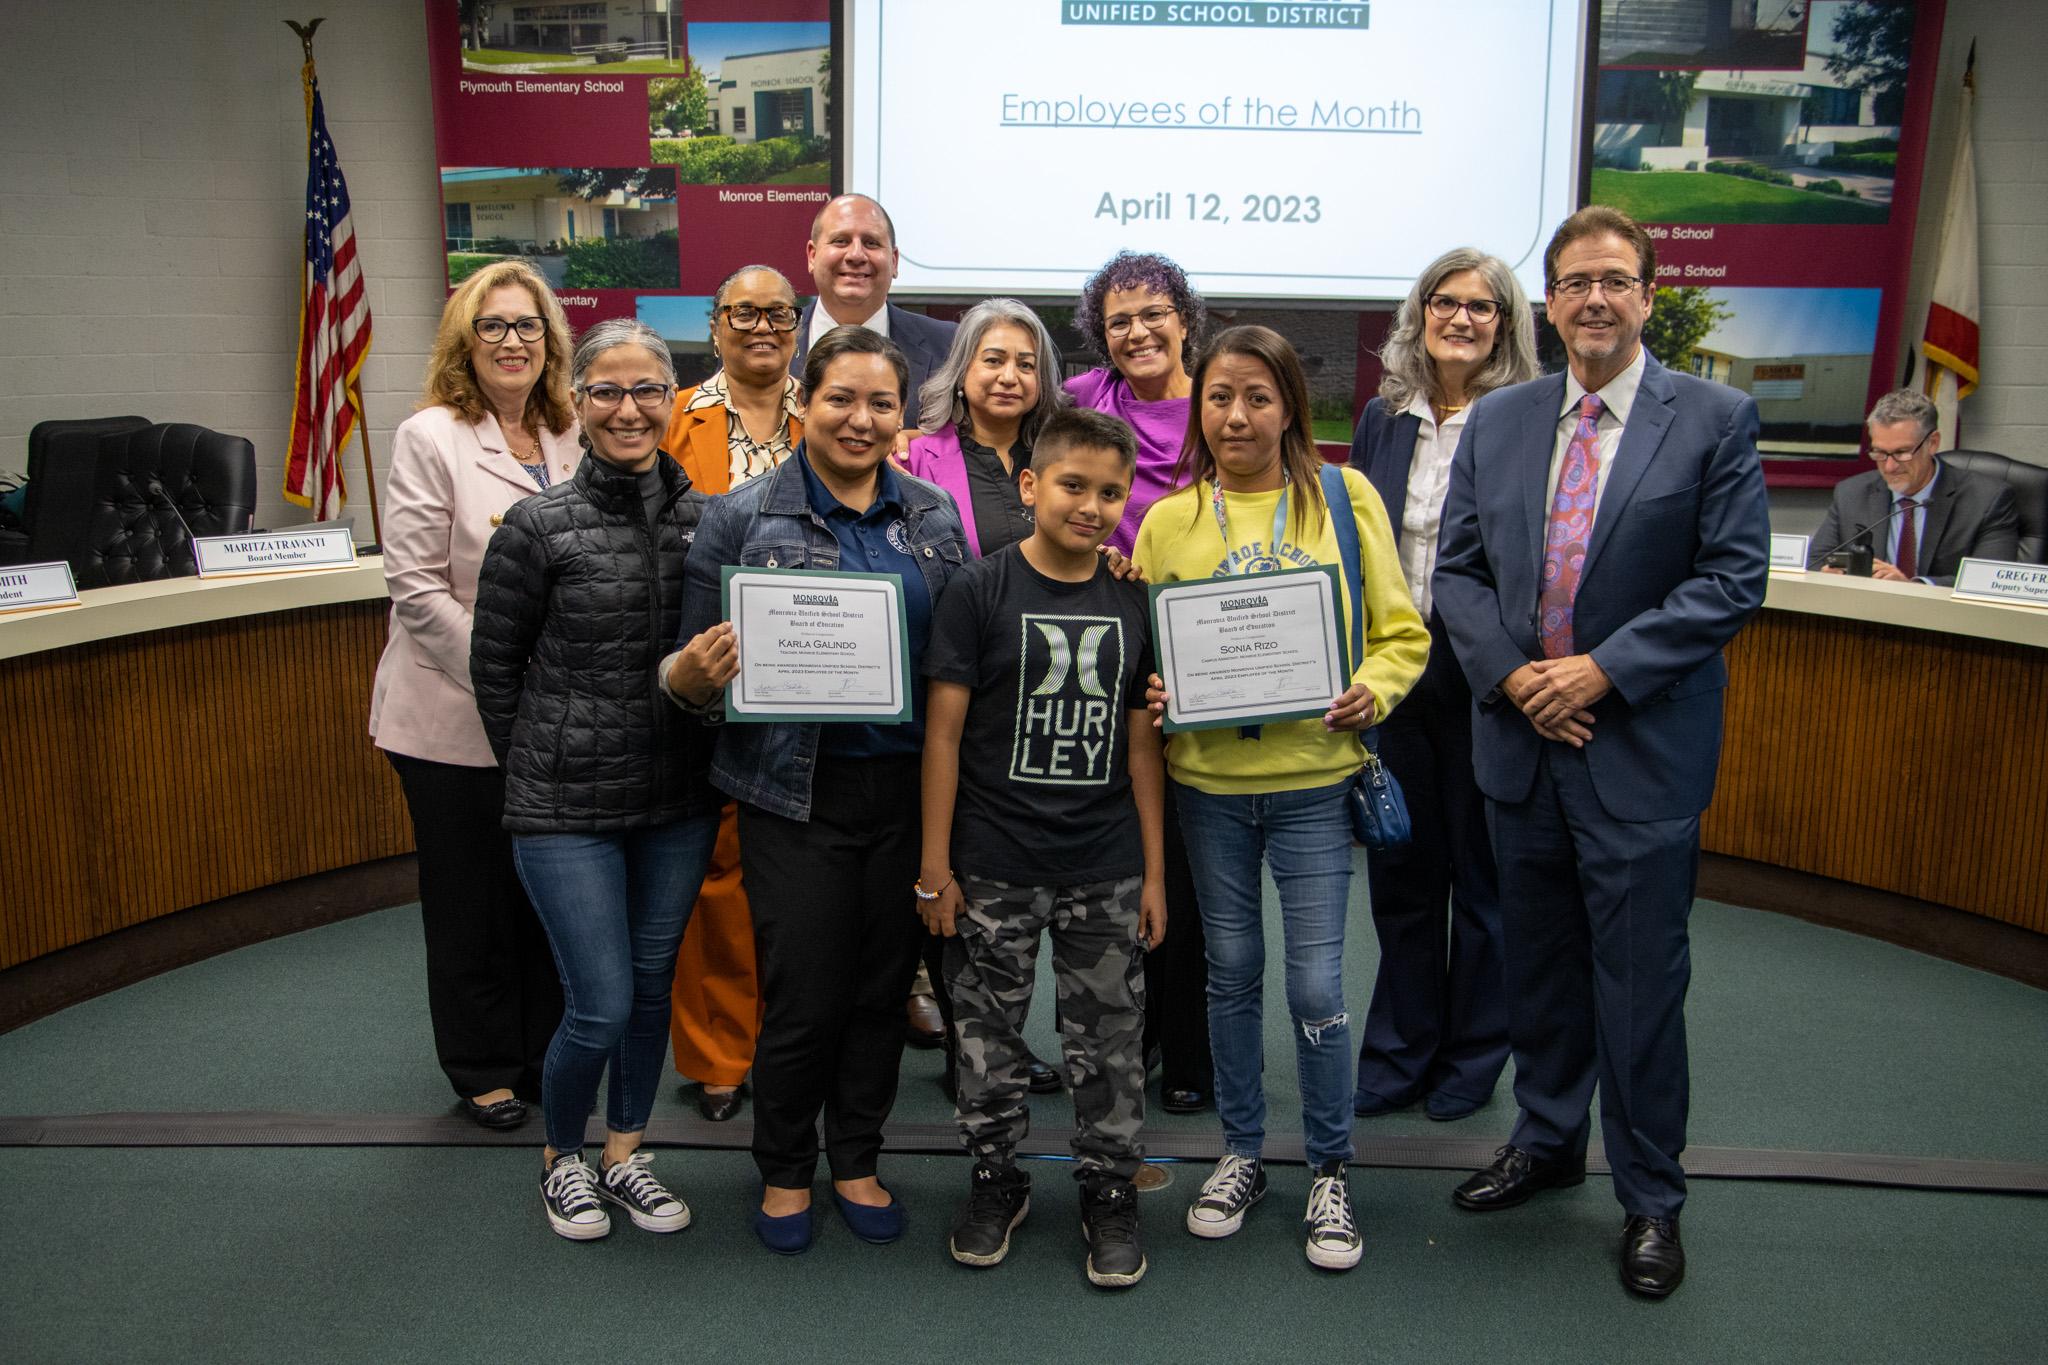 The Board of Education & the Monrovia Chamber of Commerce congratulated employees on being recipients of Monrovia Unified School District's "Employees of the Month" for April.